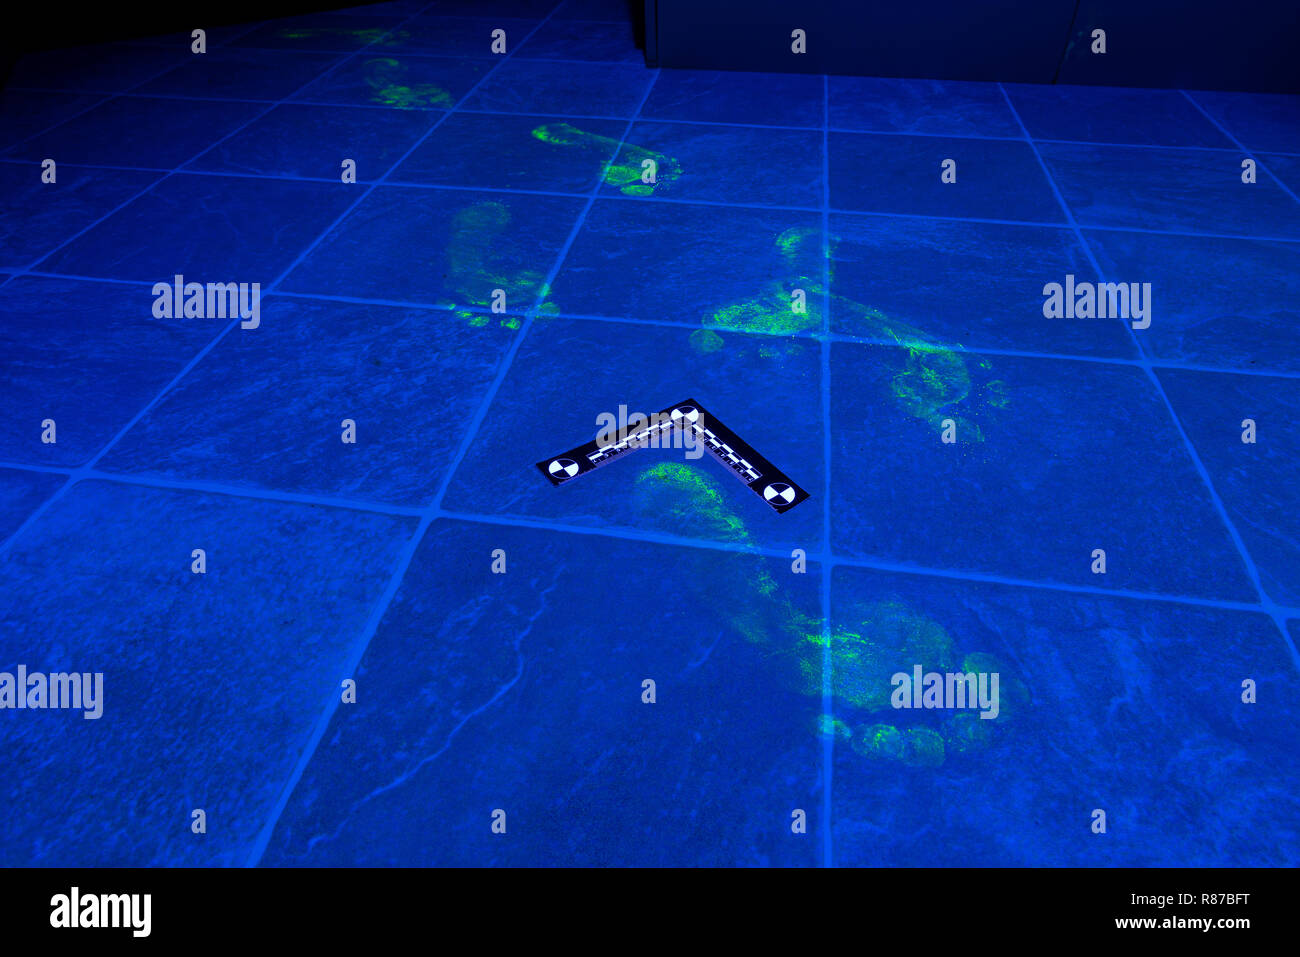 Footprint trail showing up on floor with forensic fluorescent powder under blacklight with vinyl floor also radiating blue light as identity evidence Stock Photo